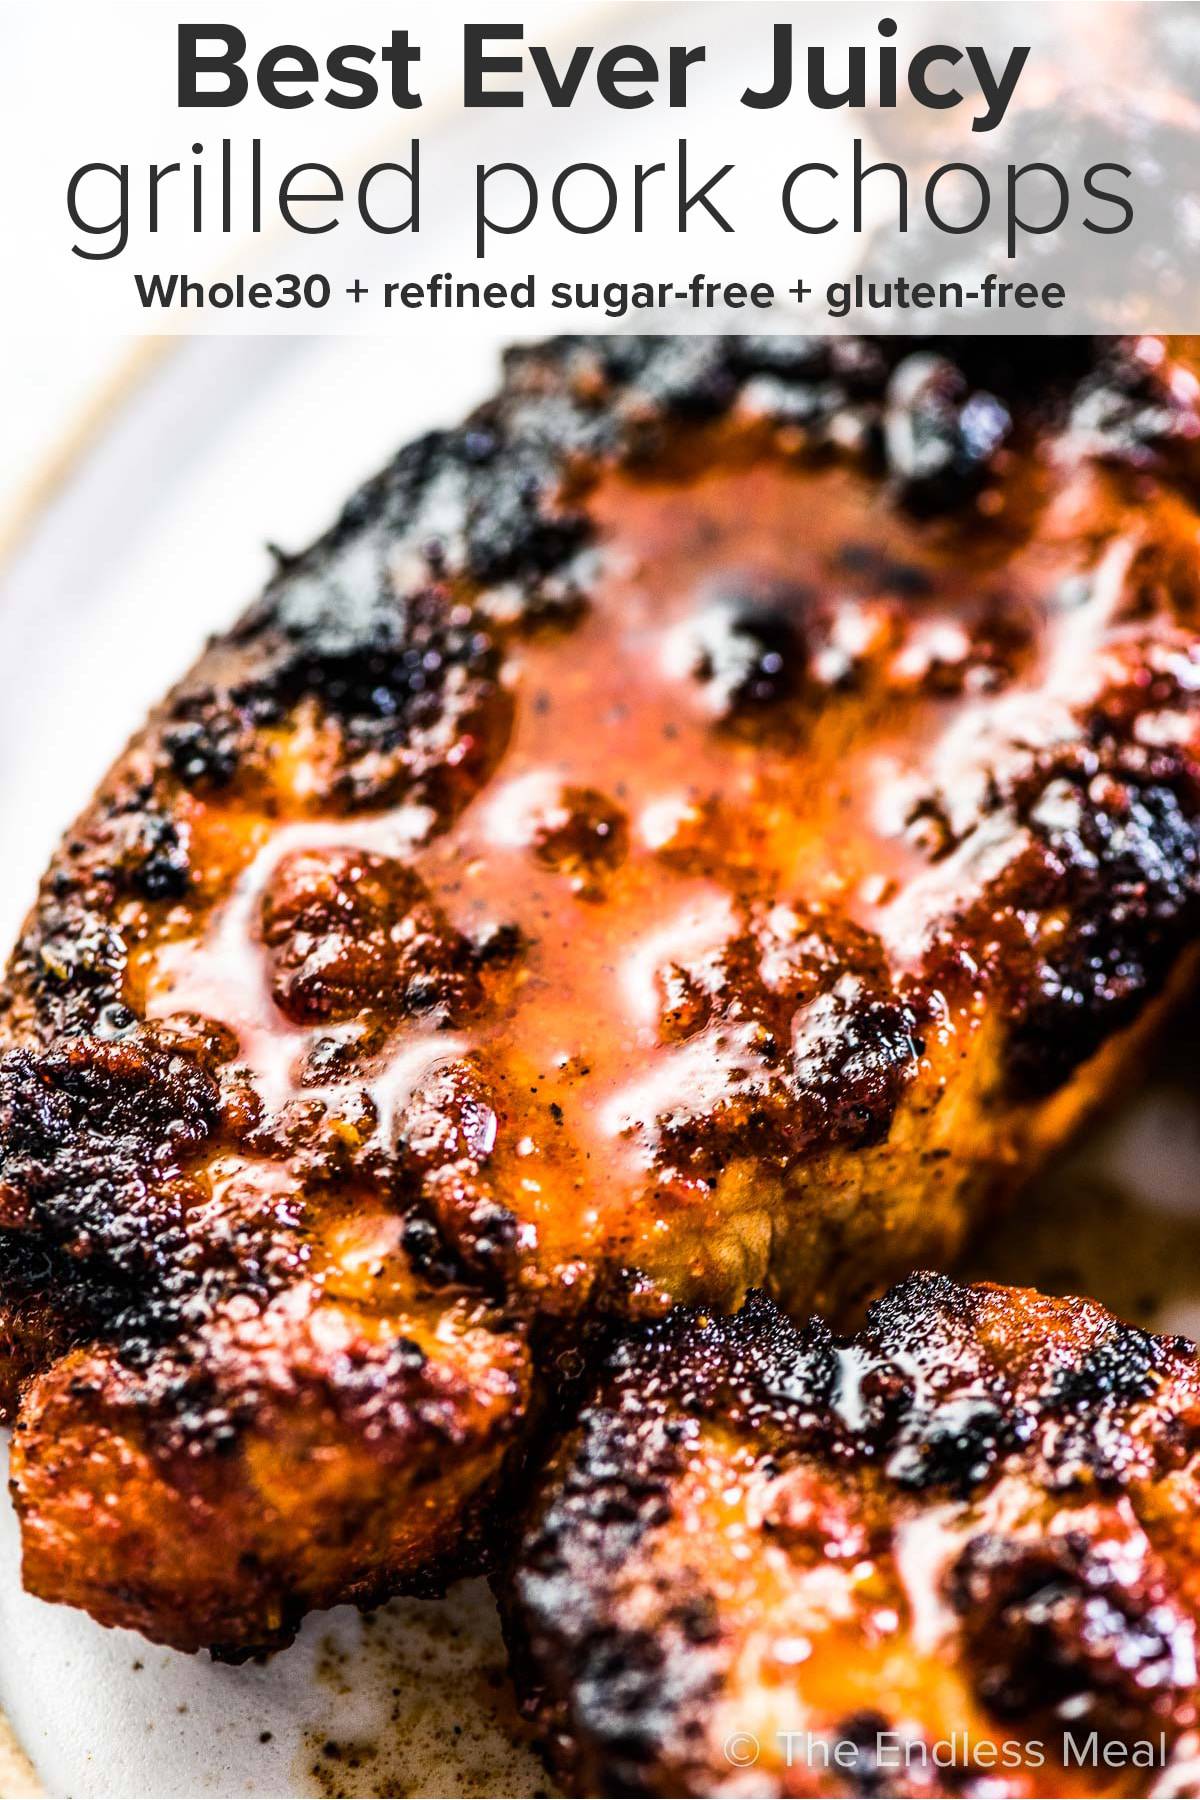 Juicy Grilled Pork Chops Super Easy Recipe The Endless Meal,Tri Tip Slow Cooker Tacos